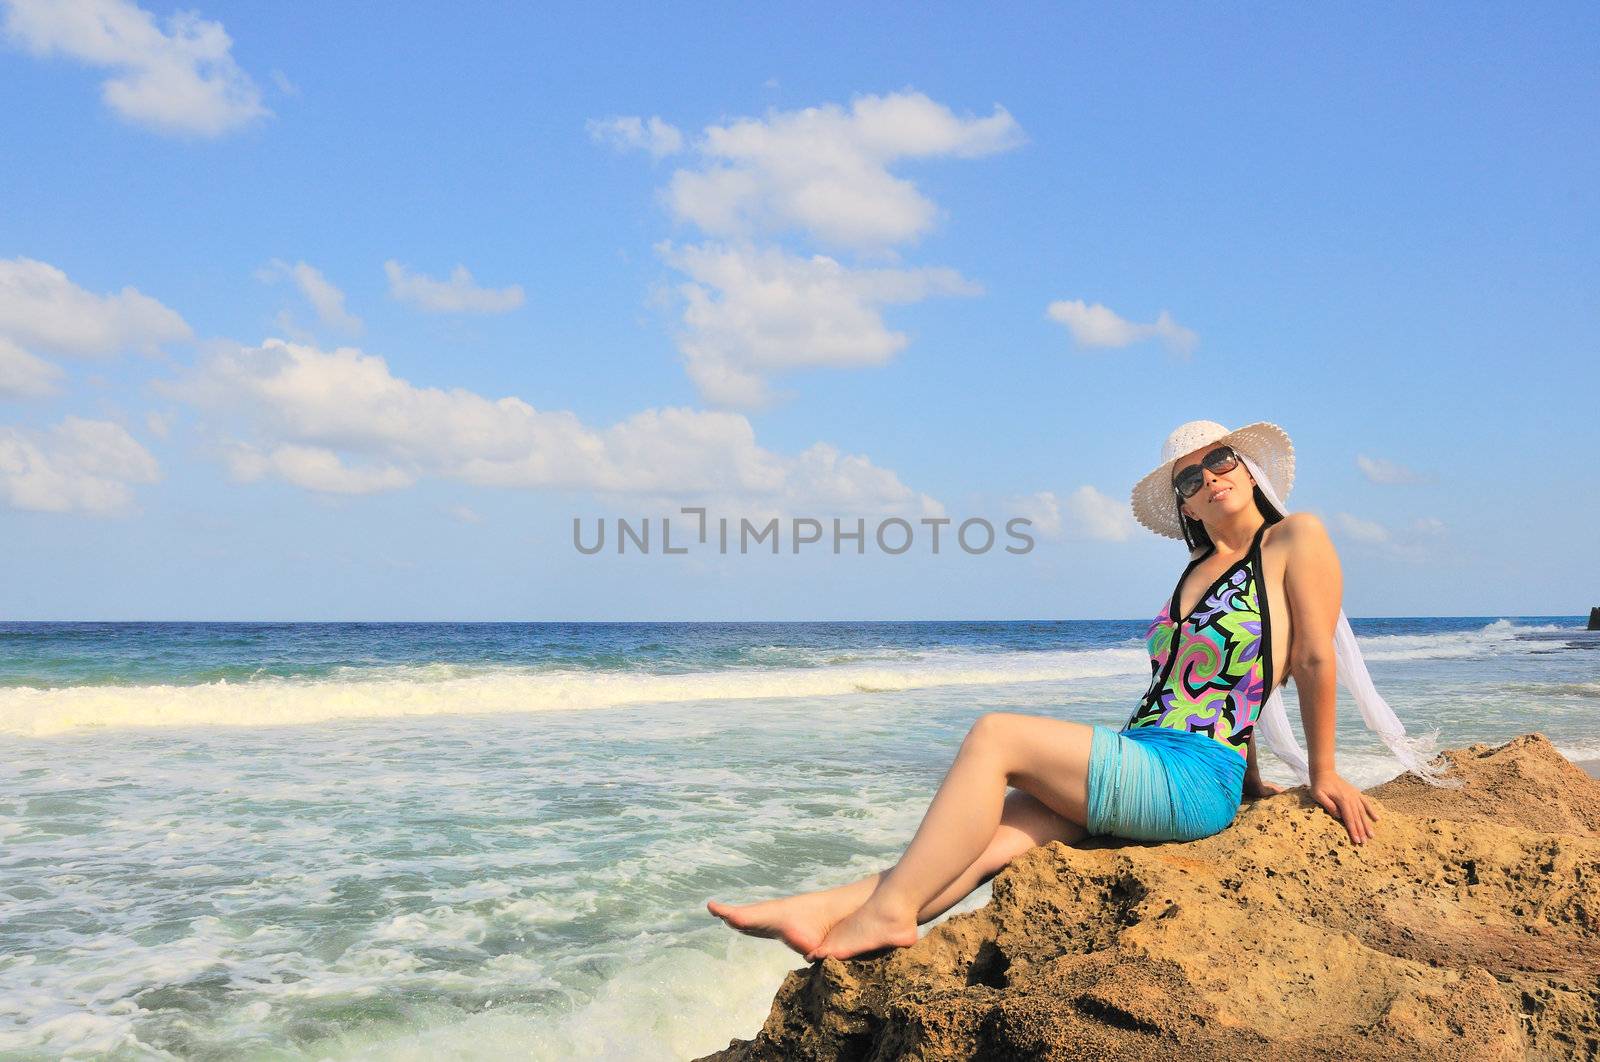 The girl in the white hat sits on a cliff near the sea and posing for a photograph